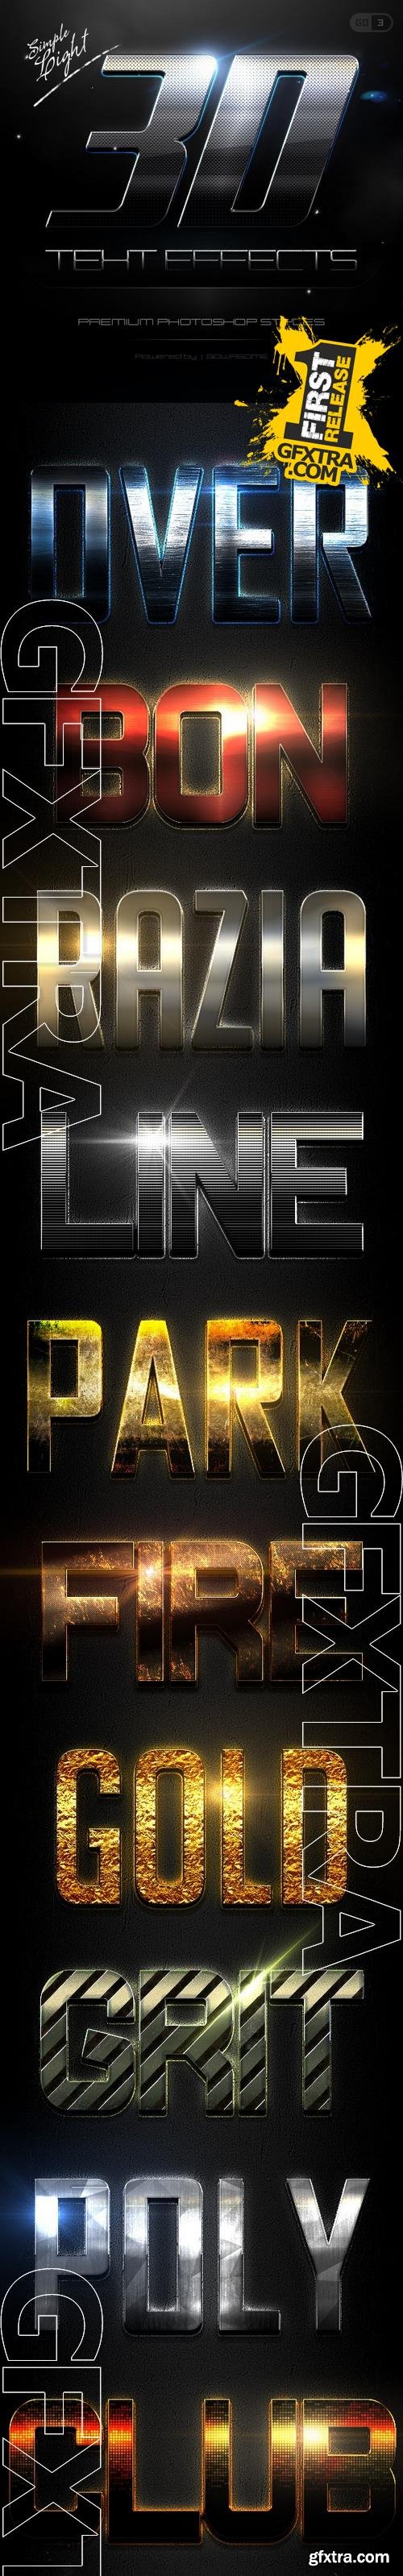 Simple 3D Light Text Effects GO.3 - Graphicriver 11692145